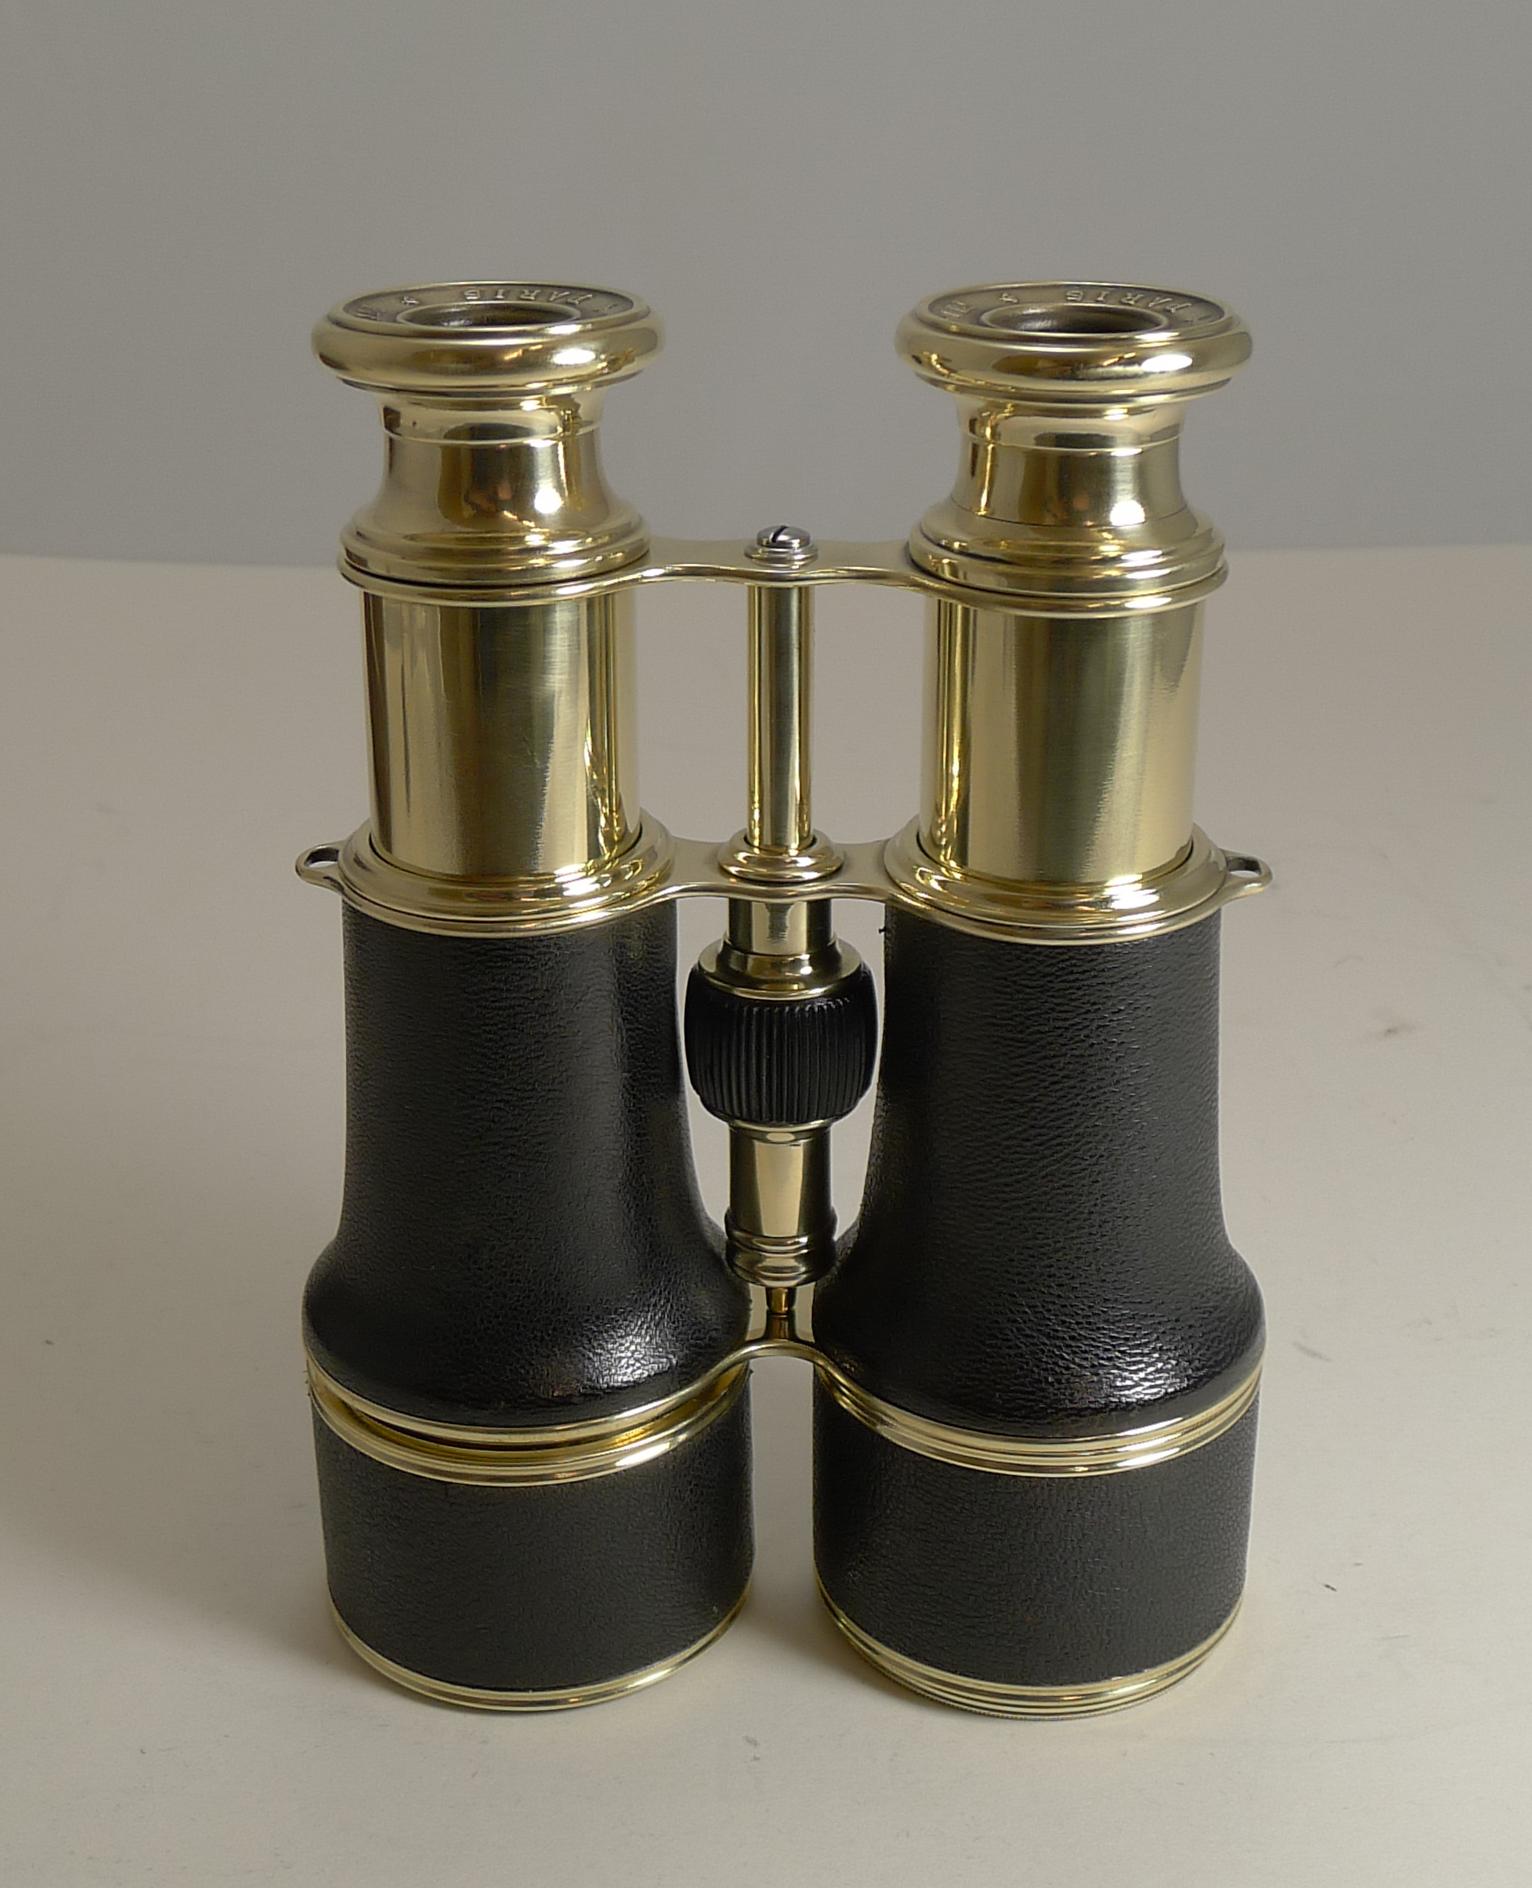 Brass Pair of WWI Binoculars and Case, British Officer's Issue, 1916, LeMaire, Paris